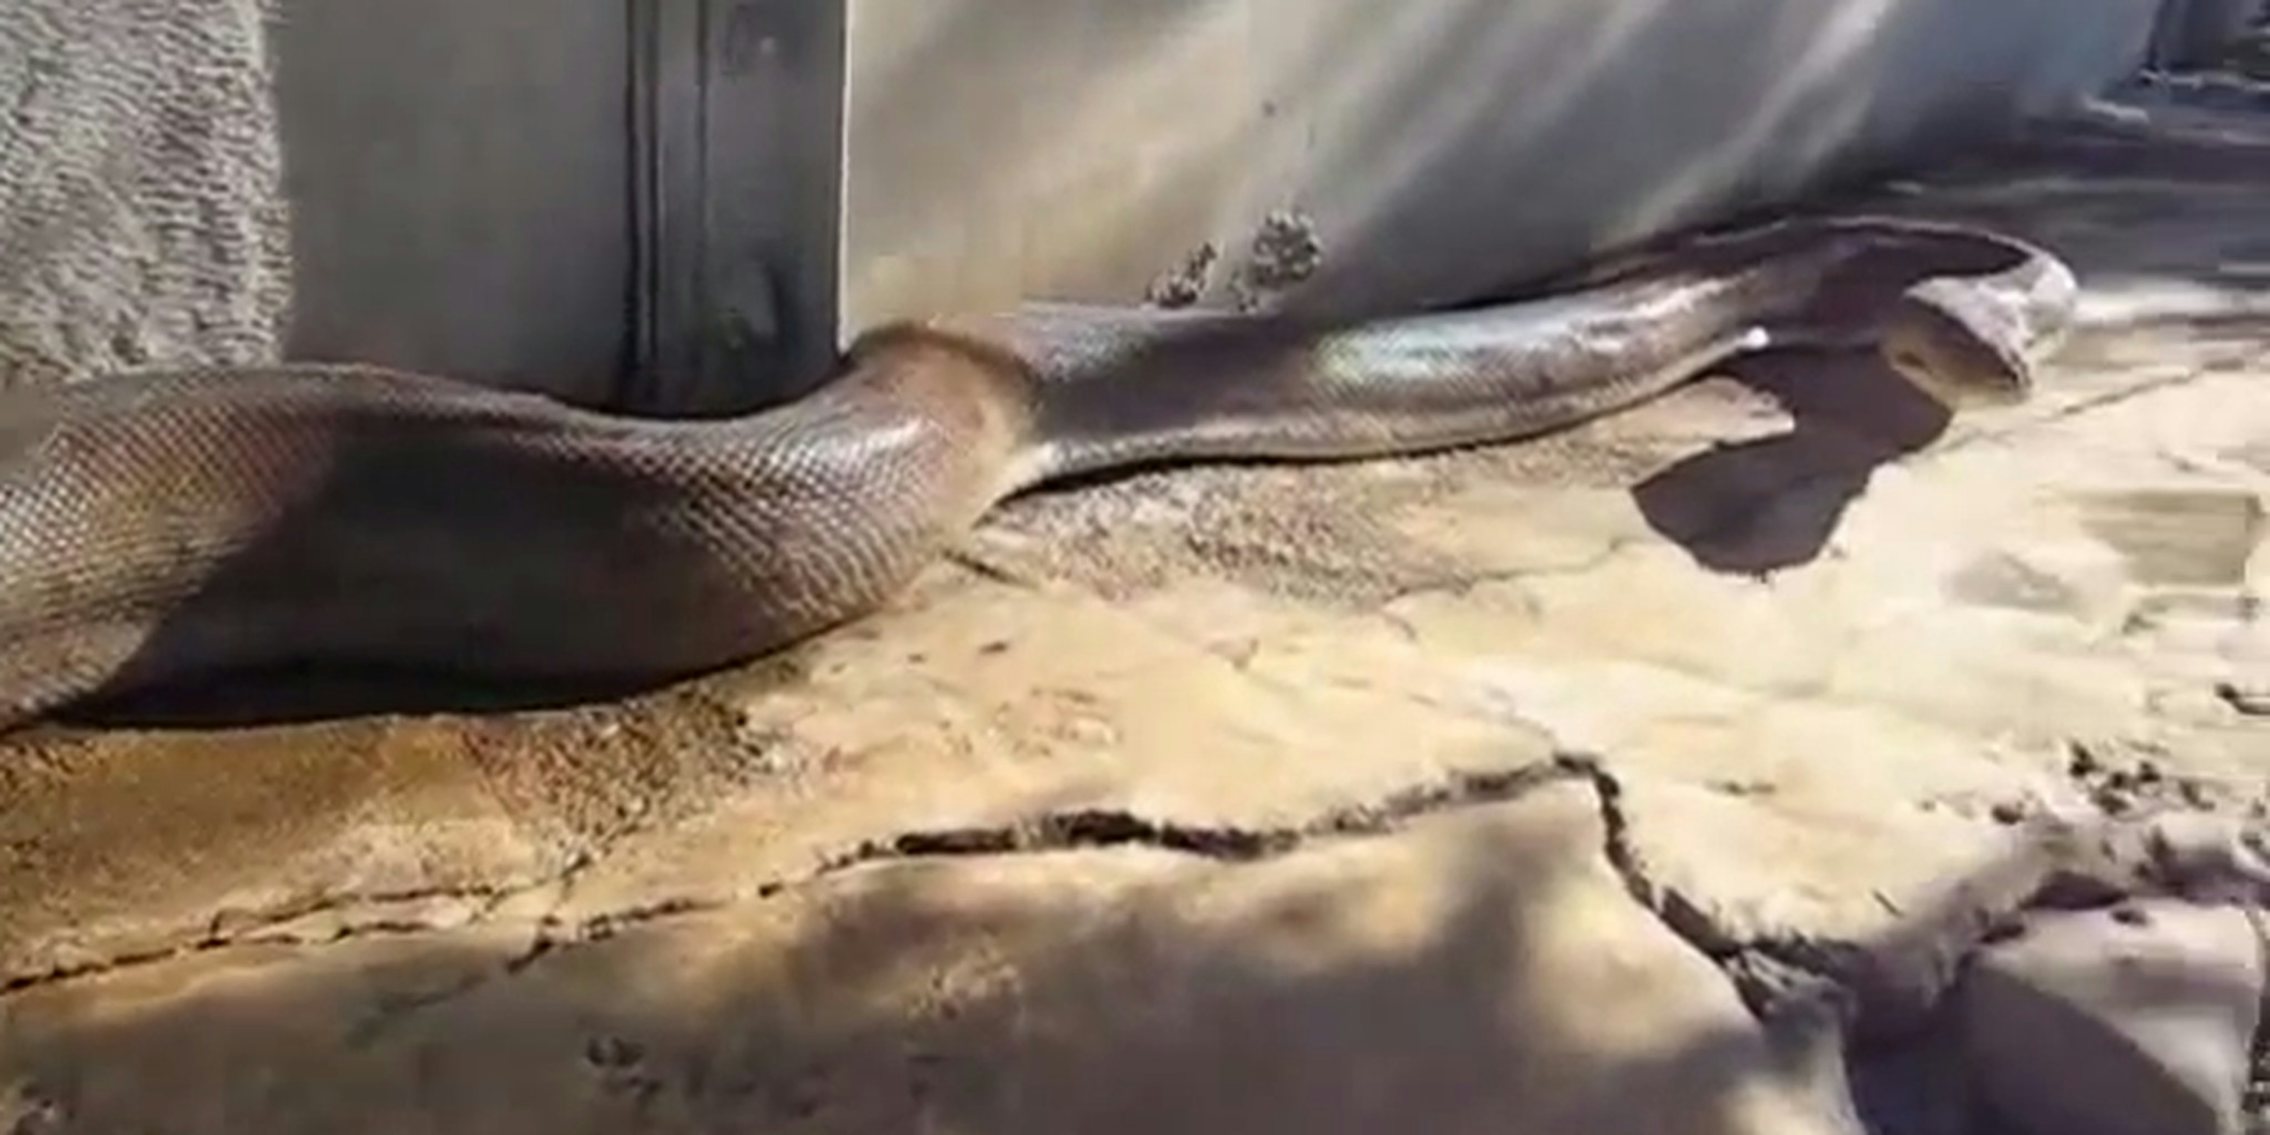 Pop Up Toilet Snake to Scare the S**t Out of Guests